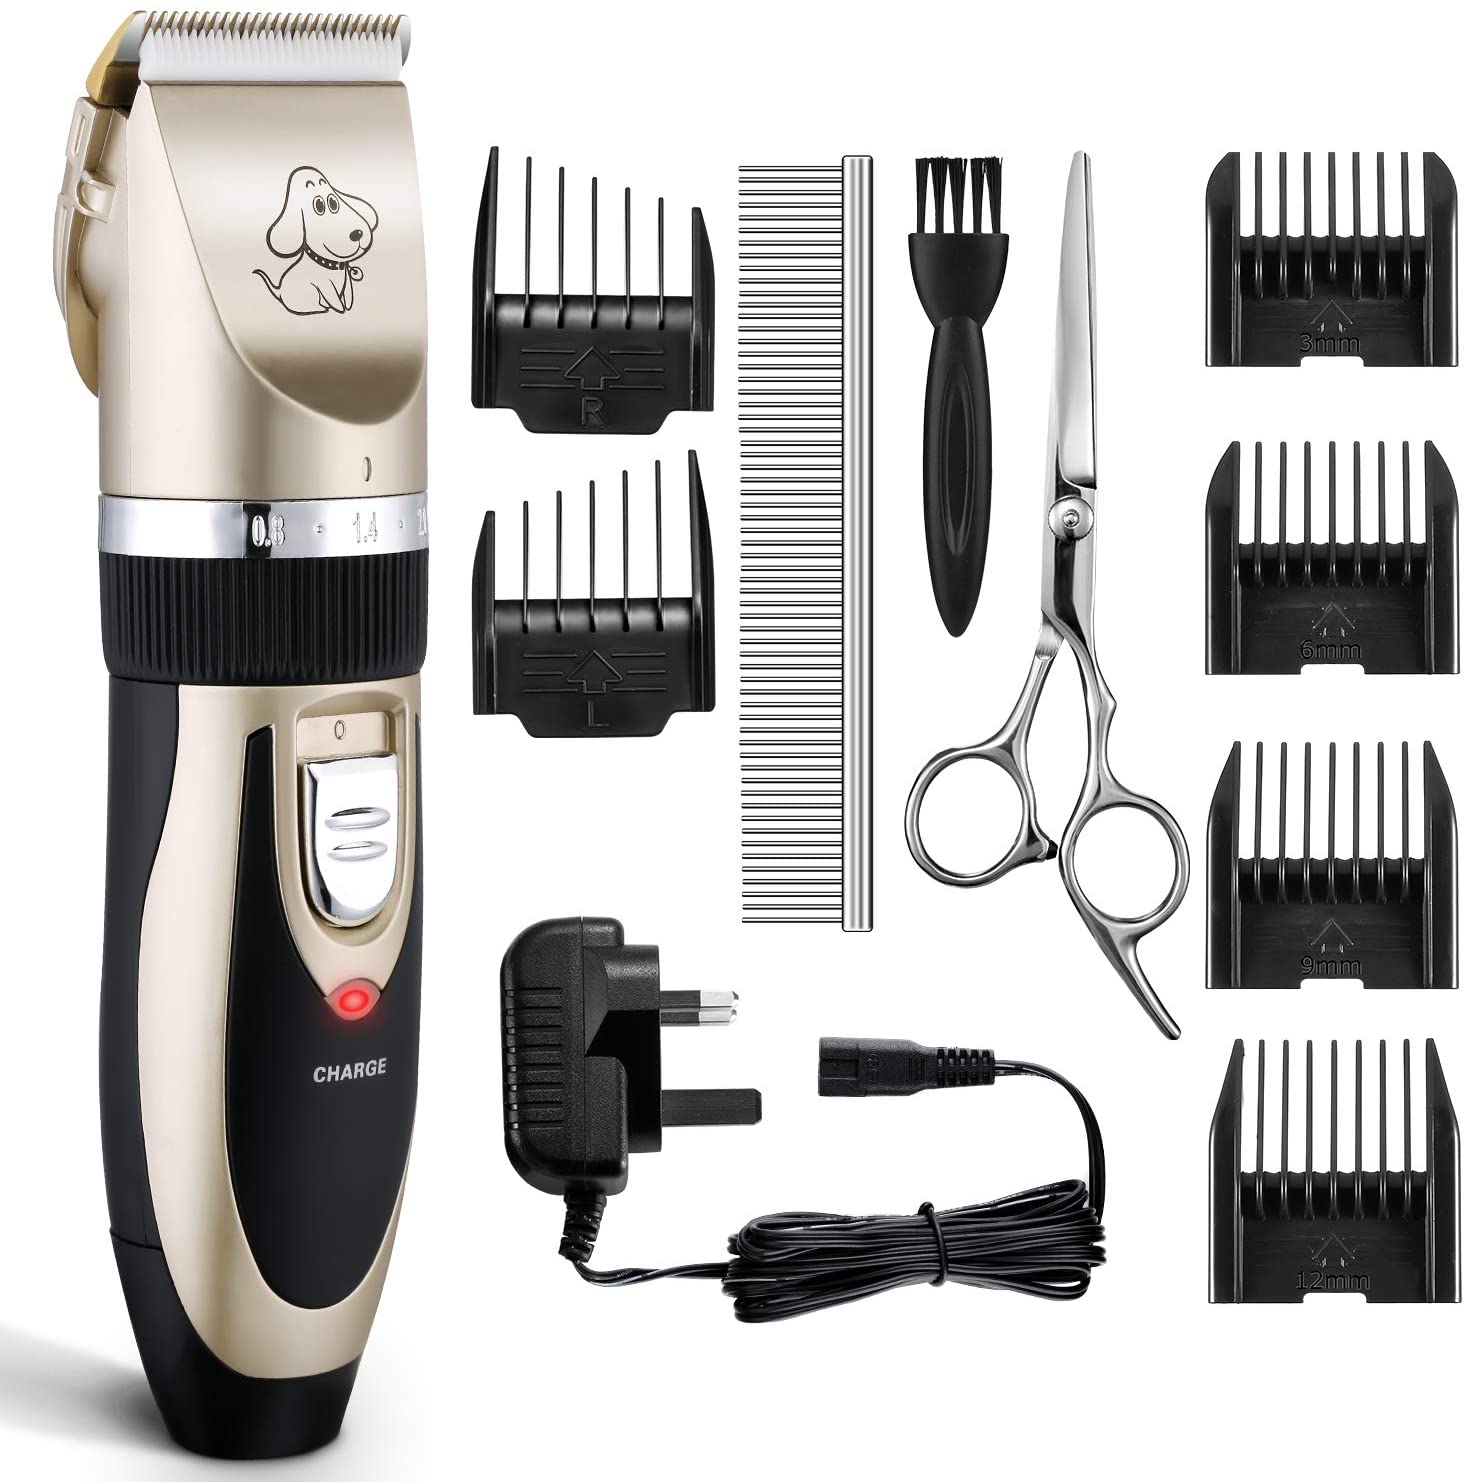 what are the best professional dog grooming clippers